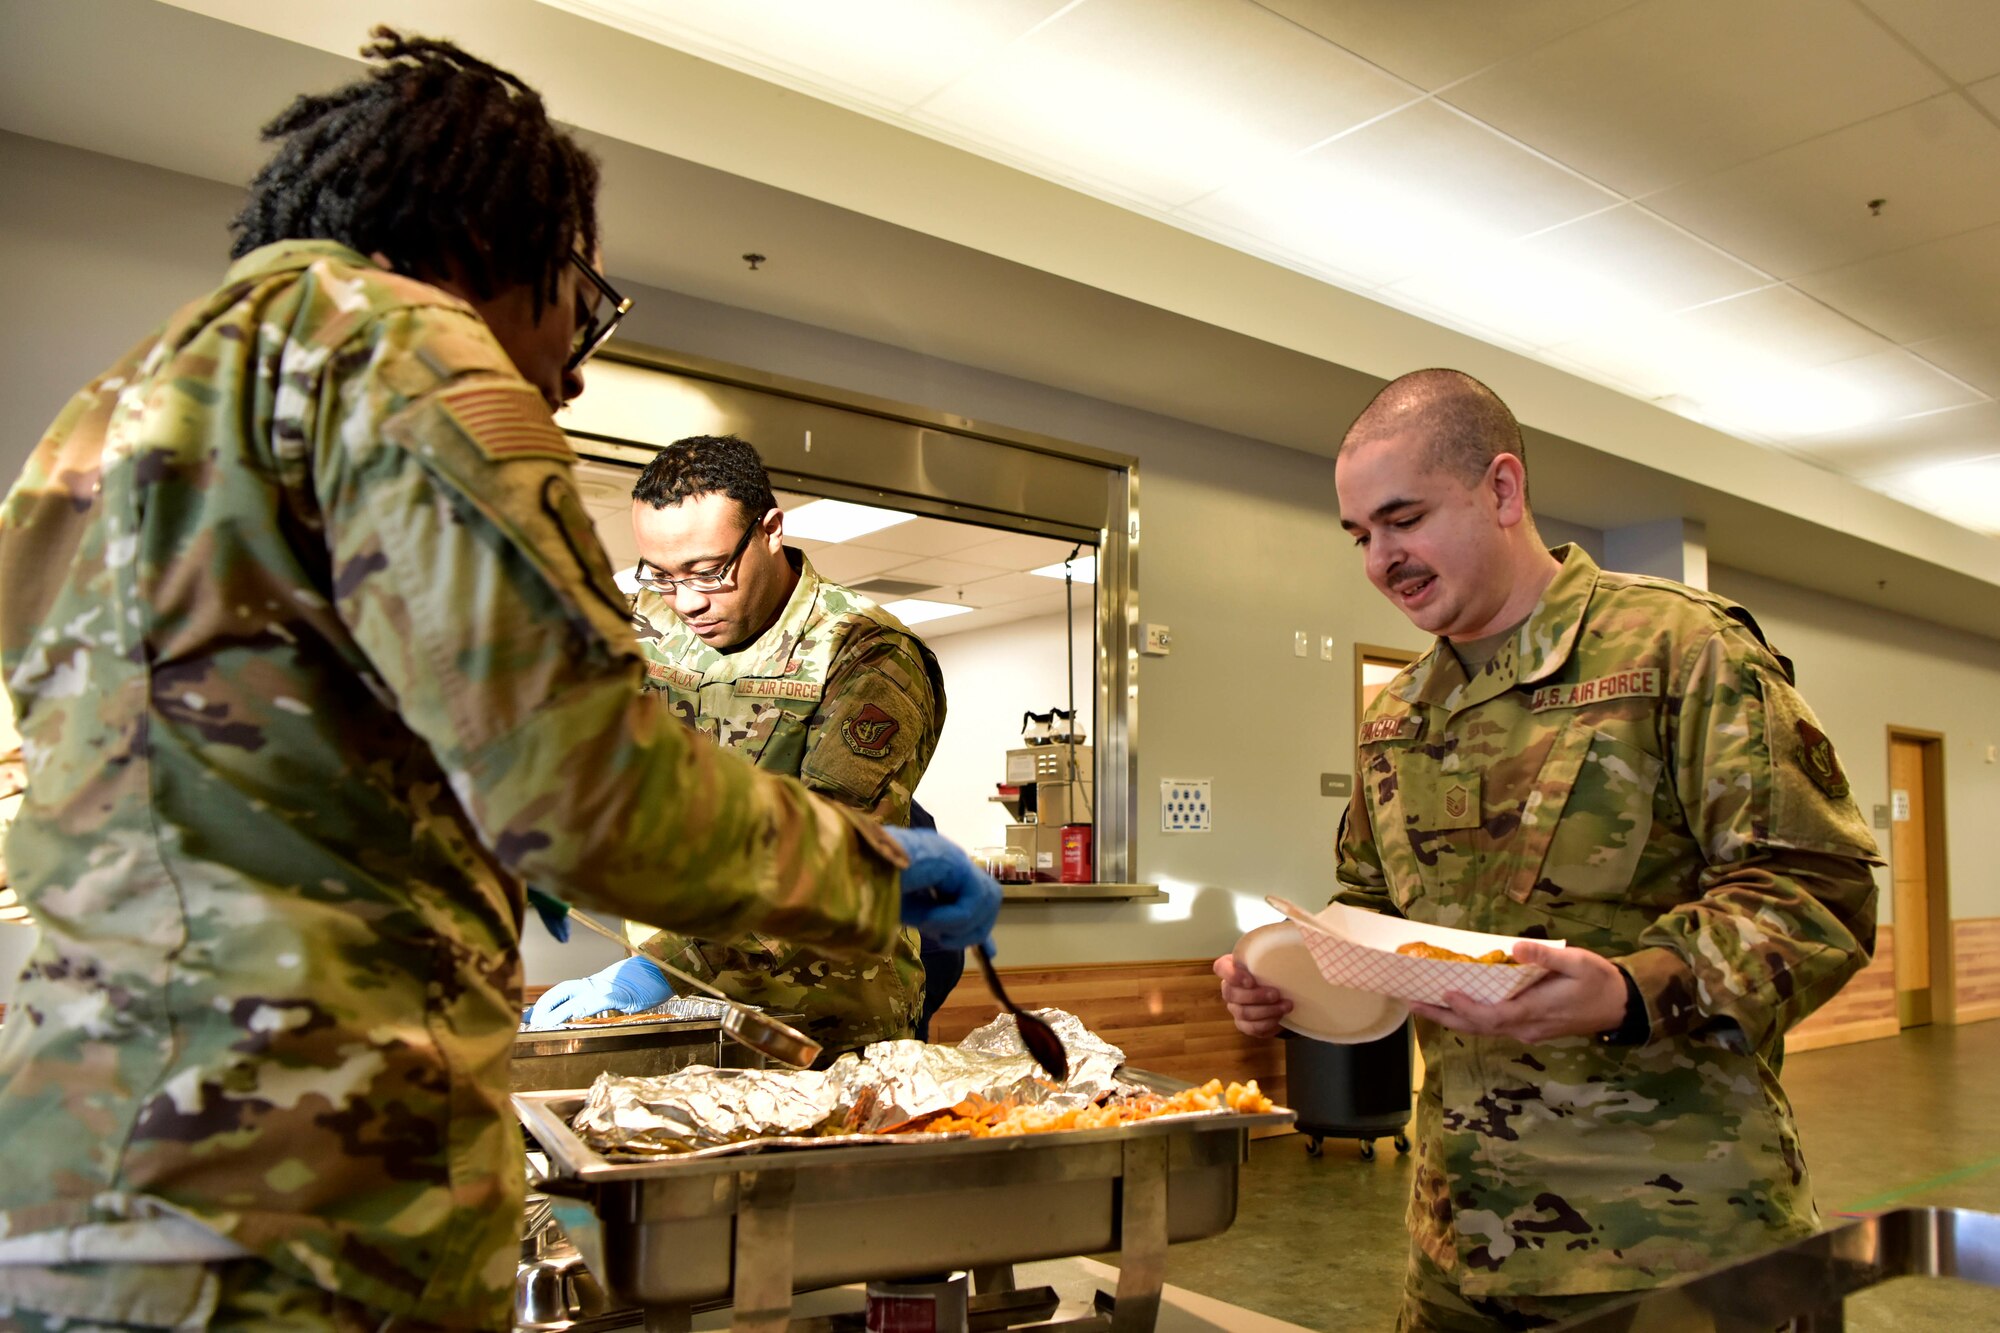 Airmen receive ethnic food at the A Taste of Culture event to celebrate Black History Month on Eielson Air Force Base, Alaska, Feb. 3, 2020. Yellow curry chicken, gumbo, red beans and rice were a few of the several dishes served at the event (U.S. Air Force photo by Senior Airman Beaux Hebert)